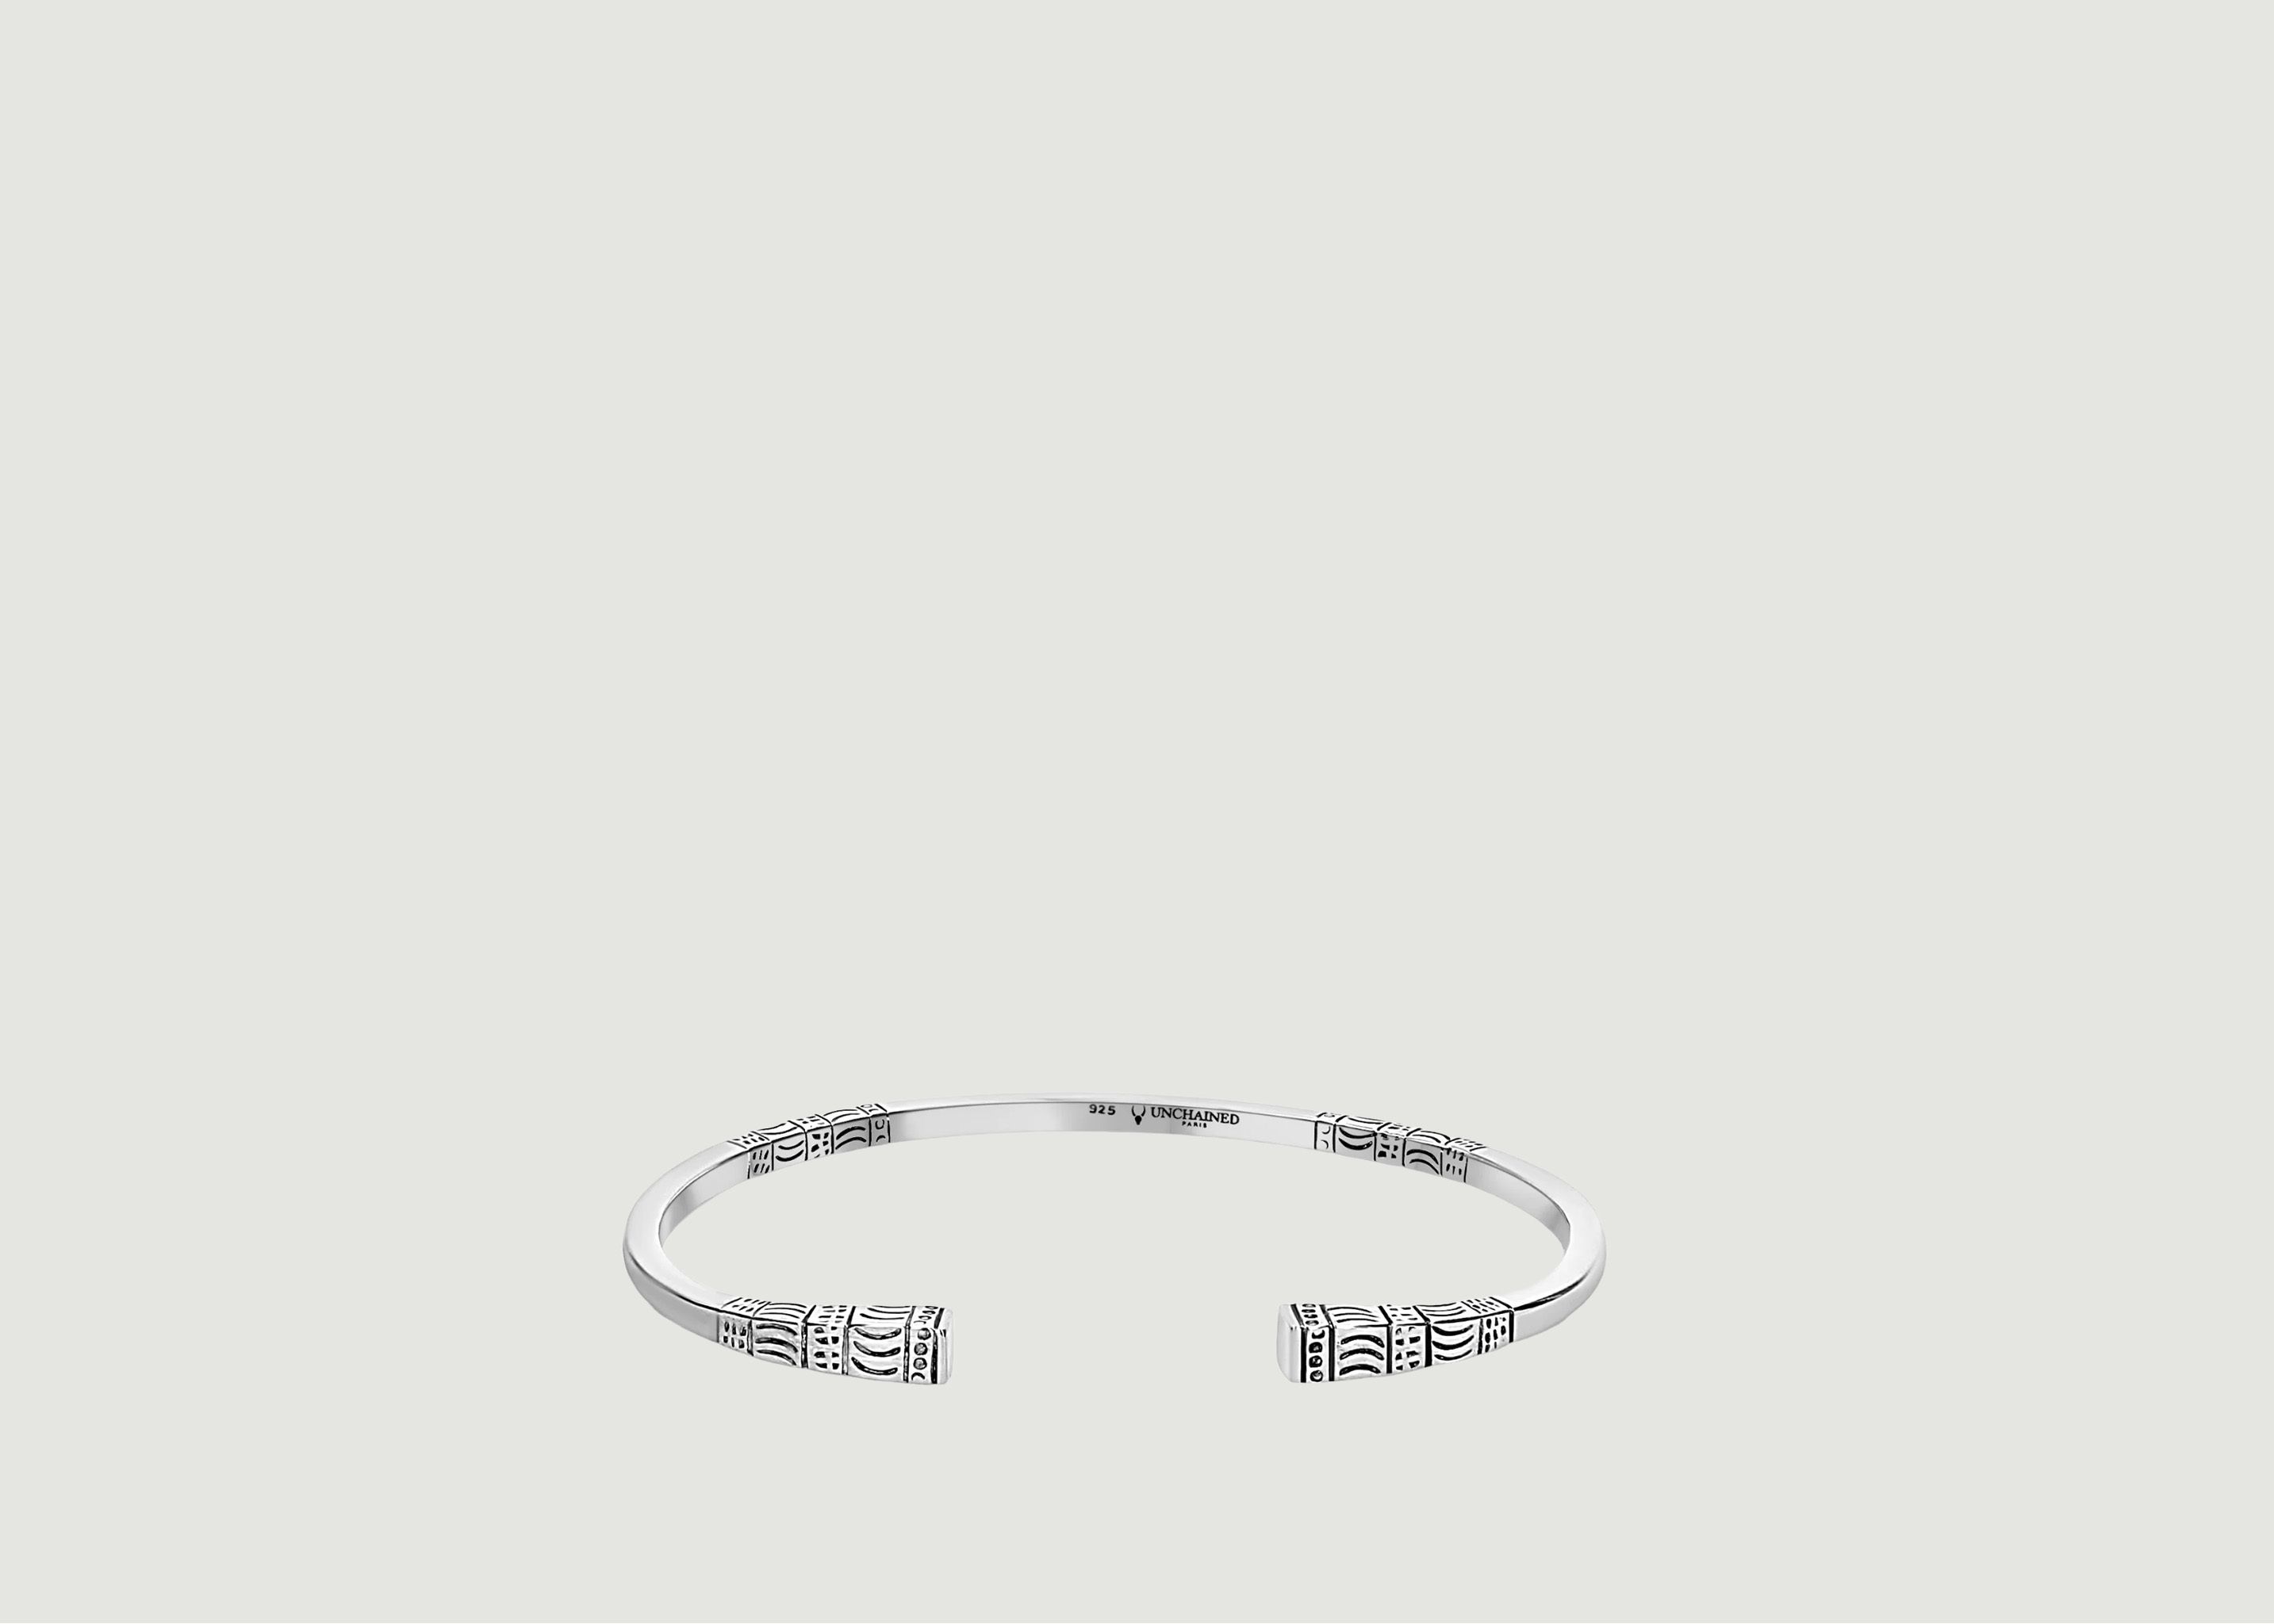 Square Hery Bracelet in Silver 925 - Unchained Paris